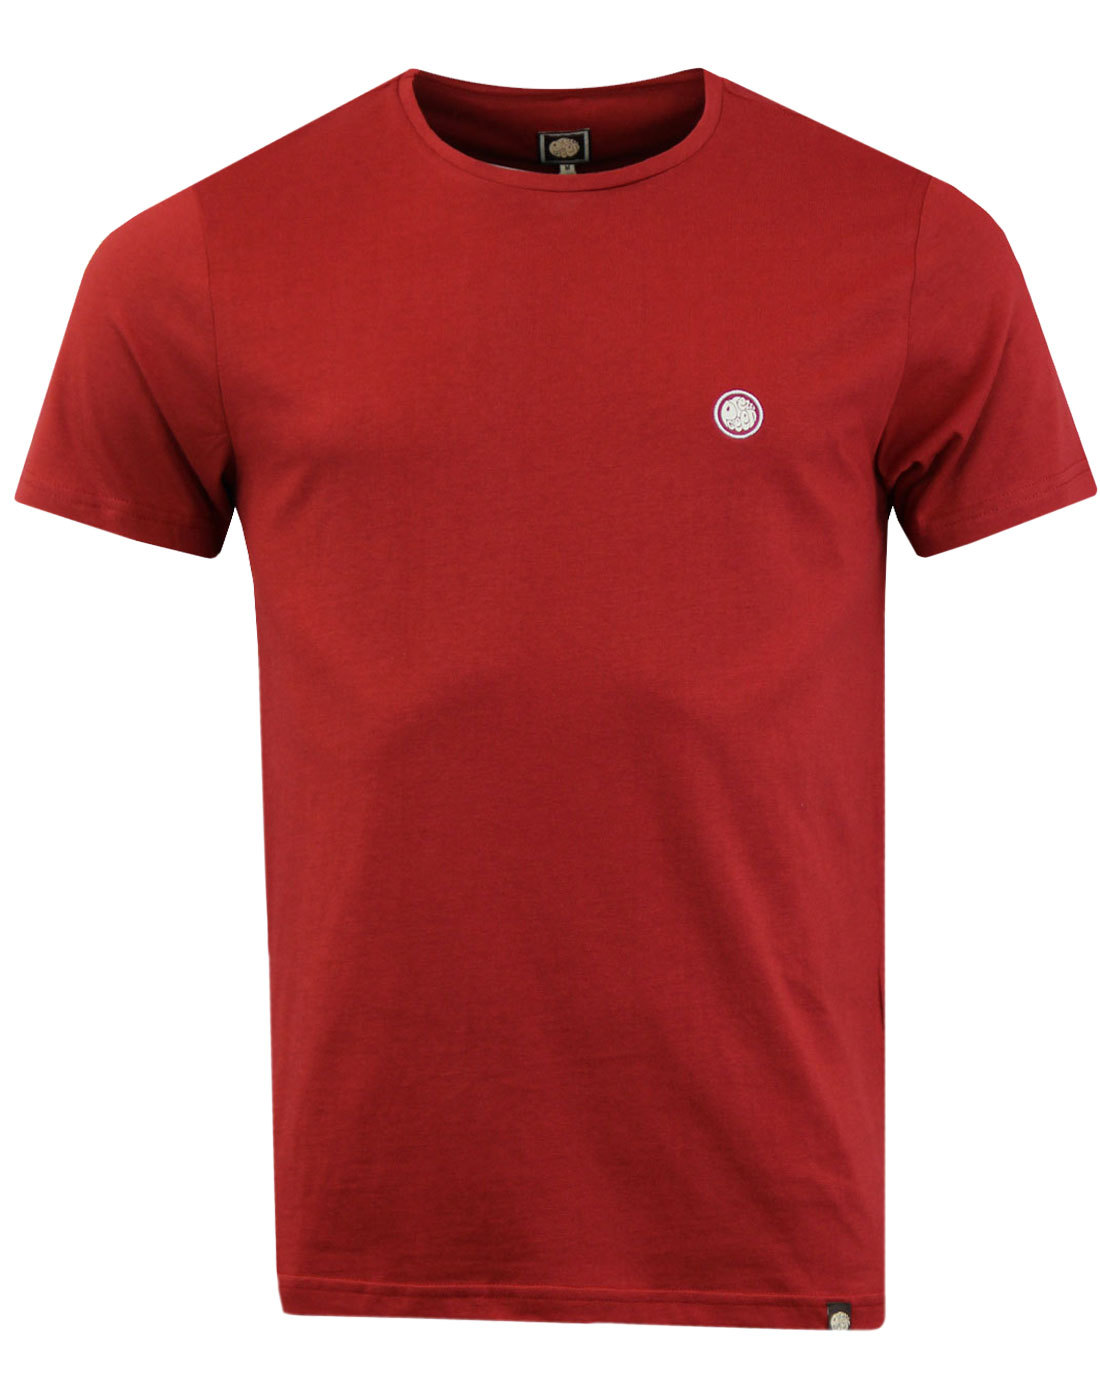 PRETTY GREEN Mens Retro Indie Mod Crew Neck T-shirt in Red